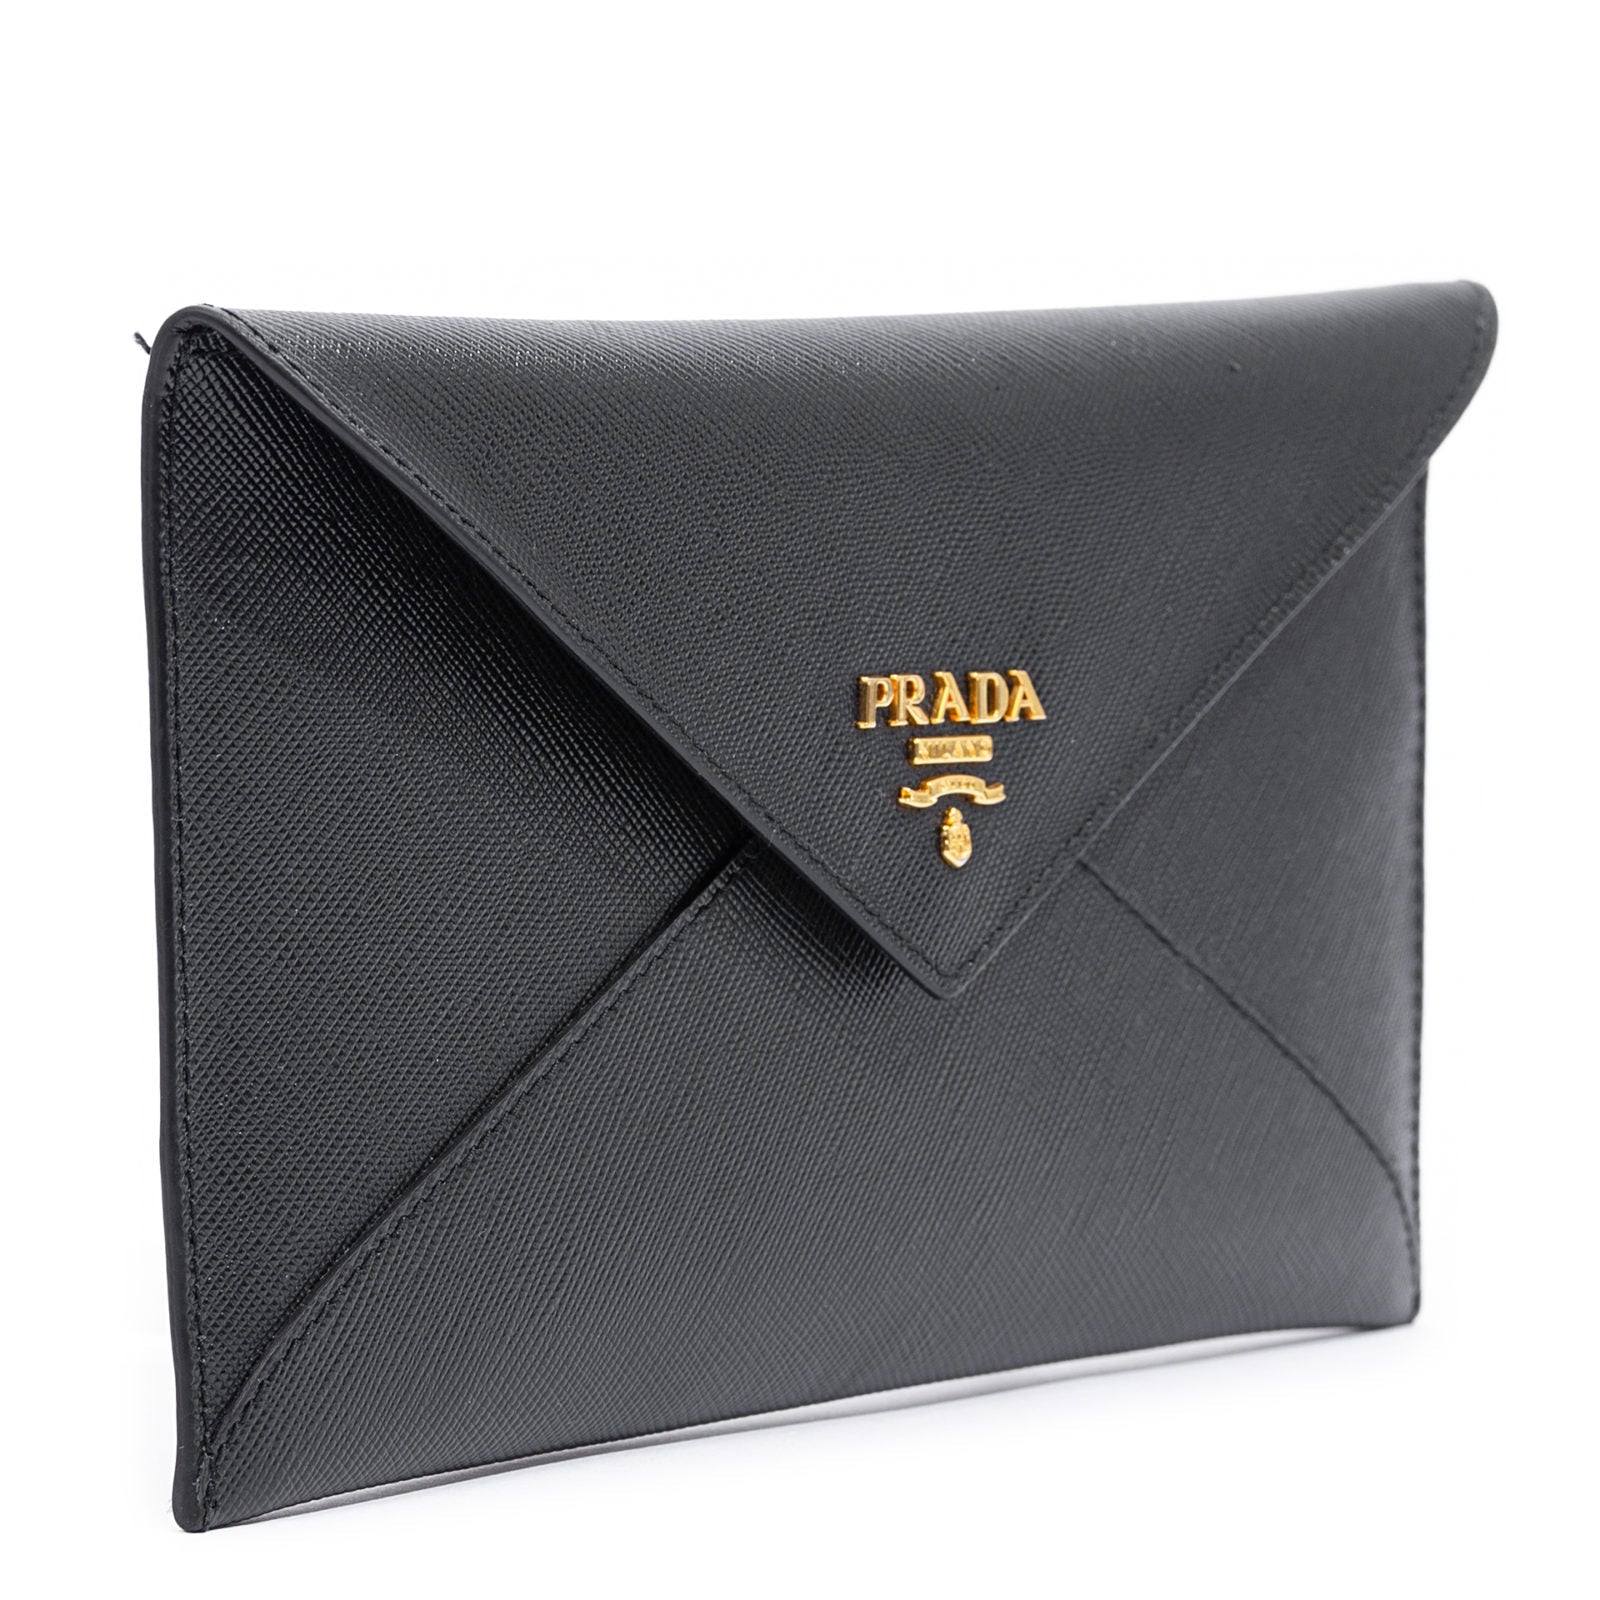 Prada Black Saffiano Leather Gold Logo Long Envelope Wallet 1MF175 at_Queen_Bee_of_Beverly_Hills